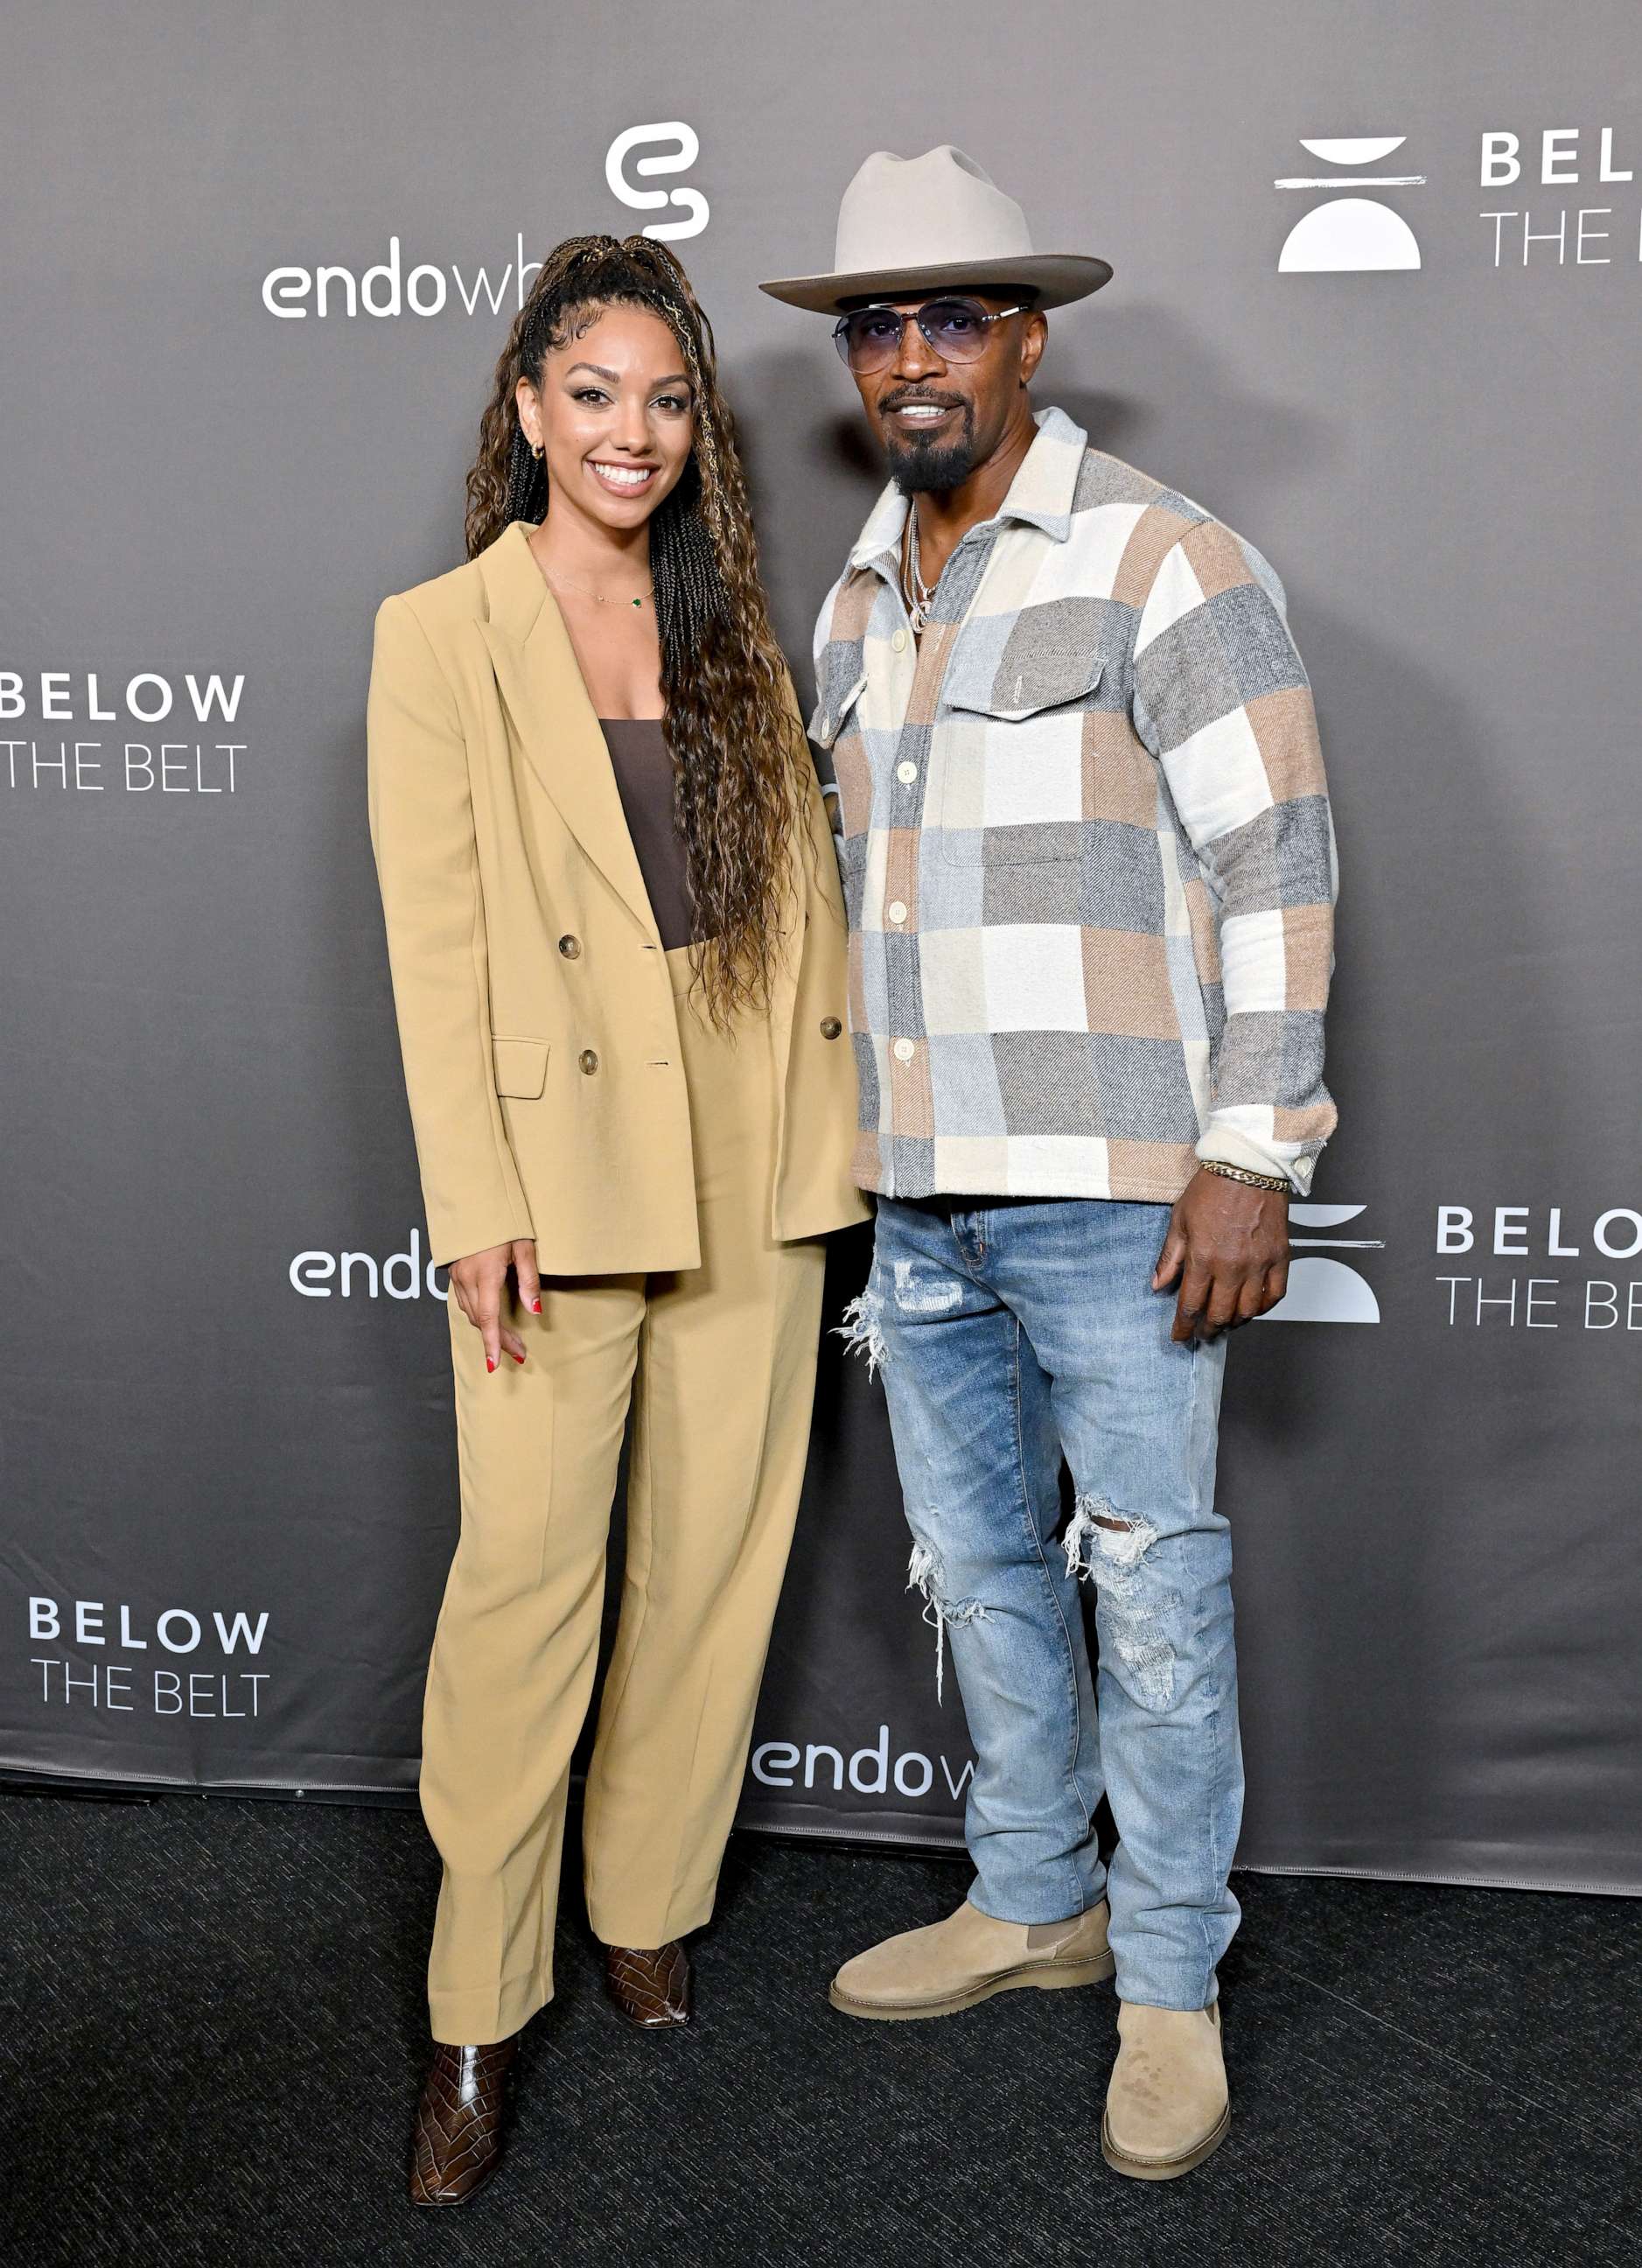 PHOTO: Corinne Foxx and Jamie Foxx attend the Los Angeles Screening of "Below The Belt" Oct. 1, 2022 in Los Angeles.